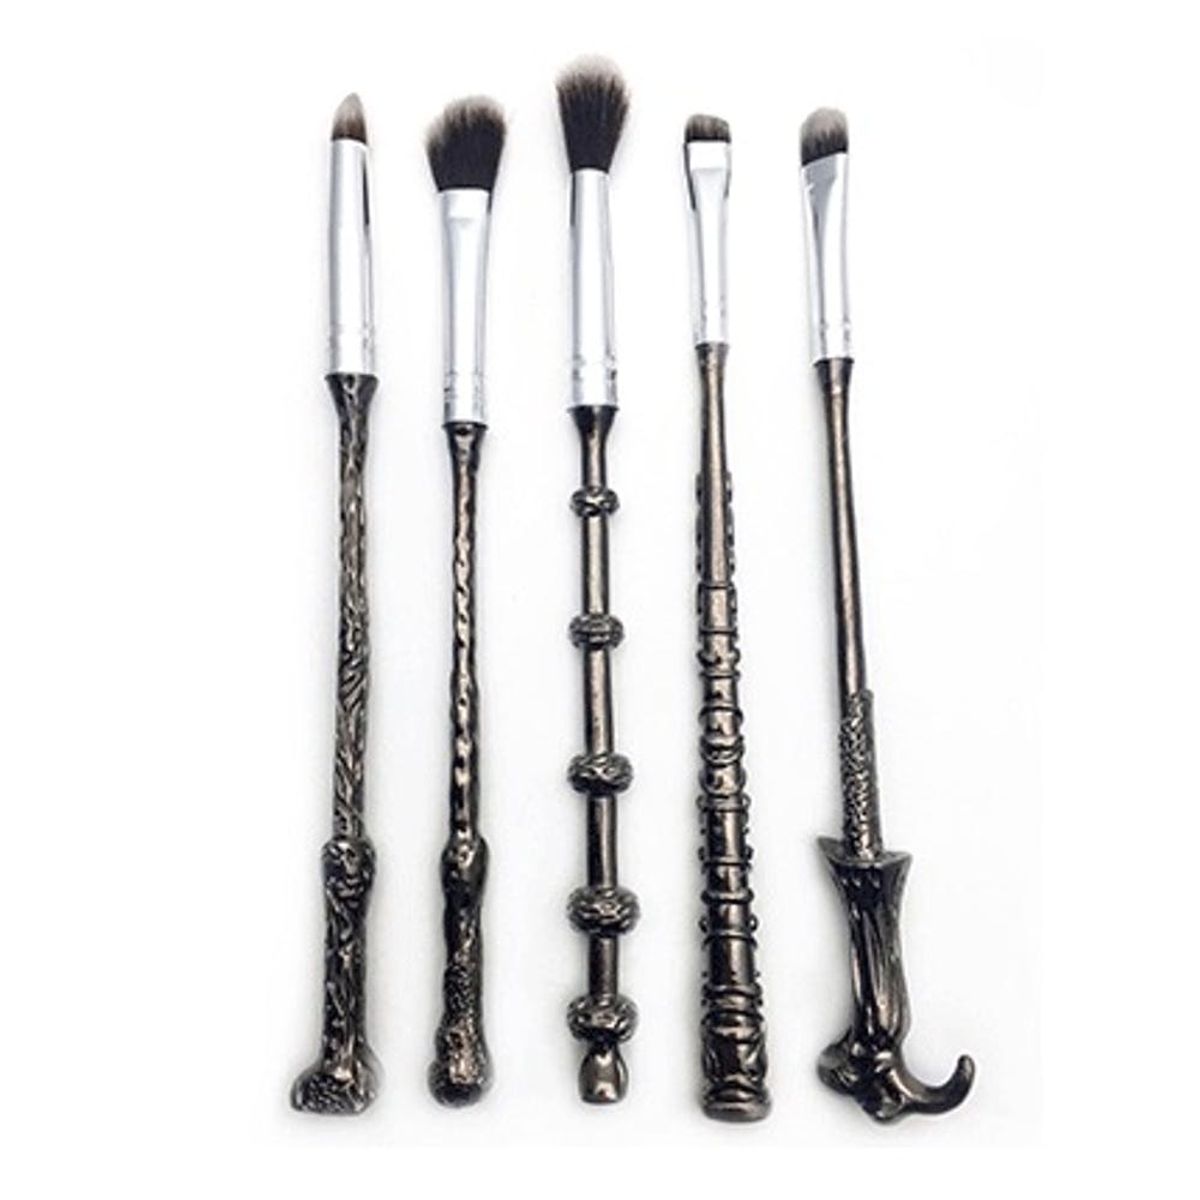 These Harry Potter Wand Makeup Brushes Will Make Your Beauty Routine Magical